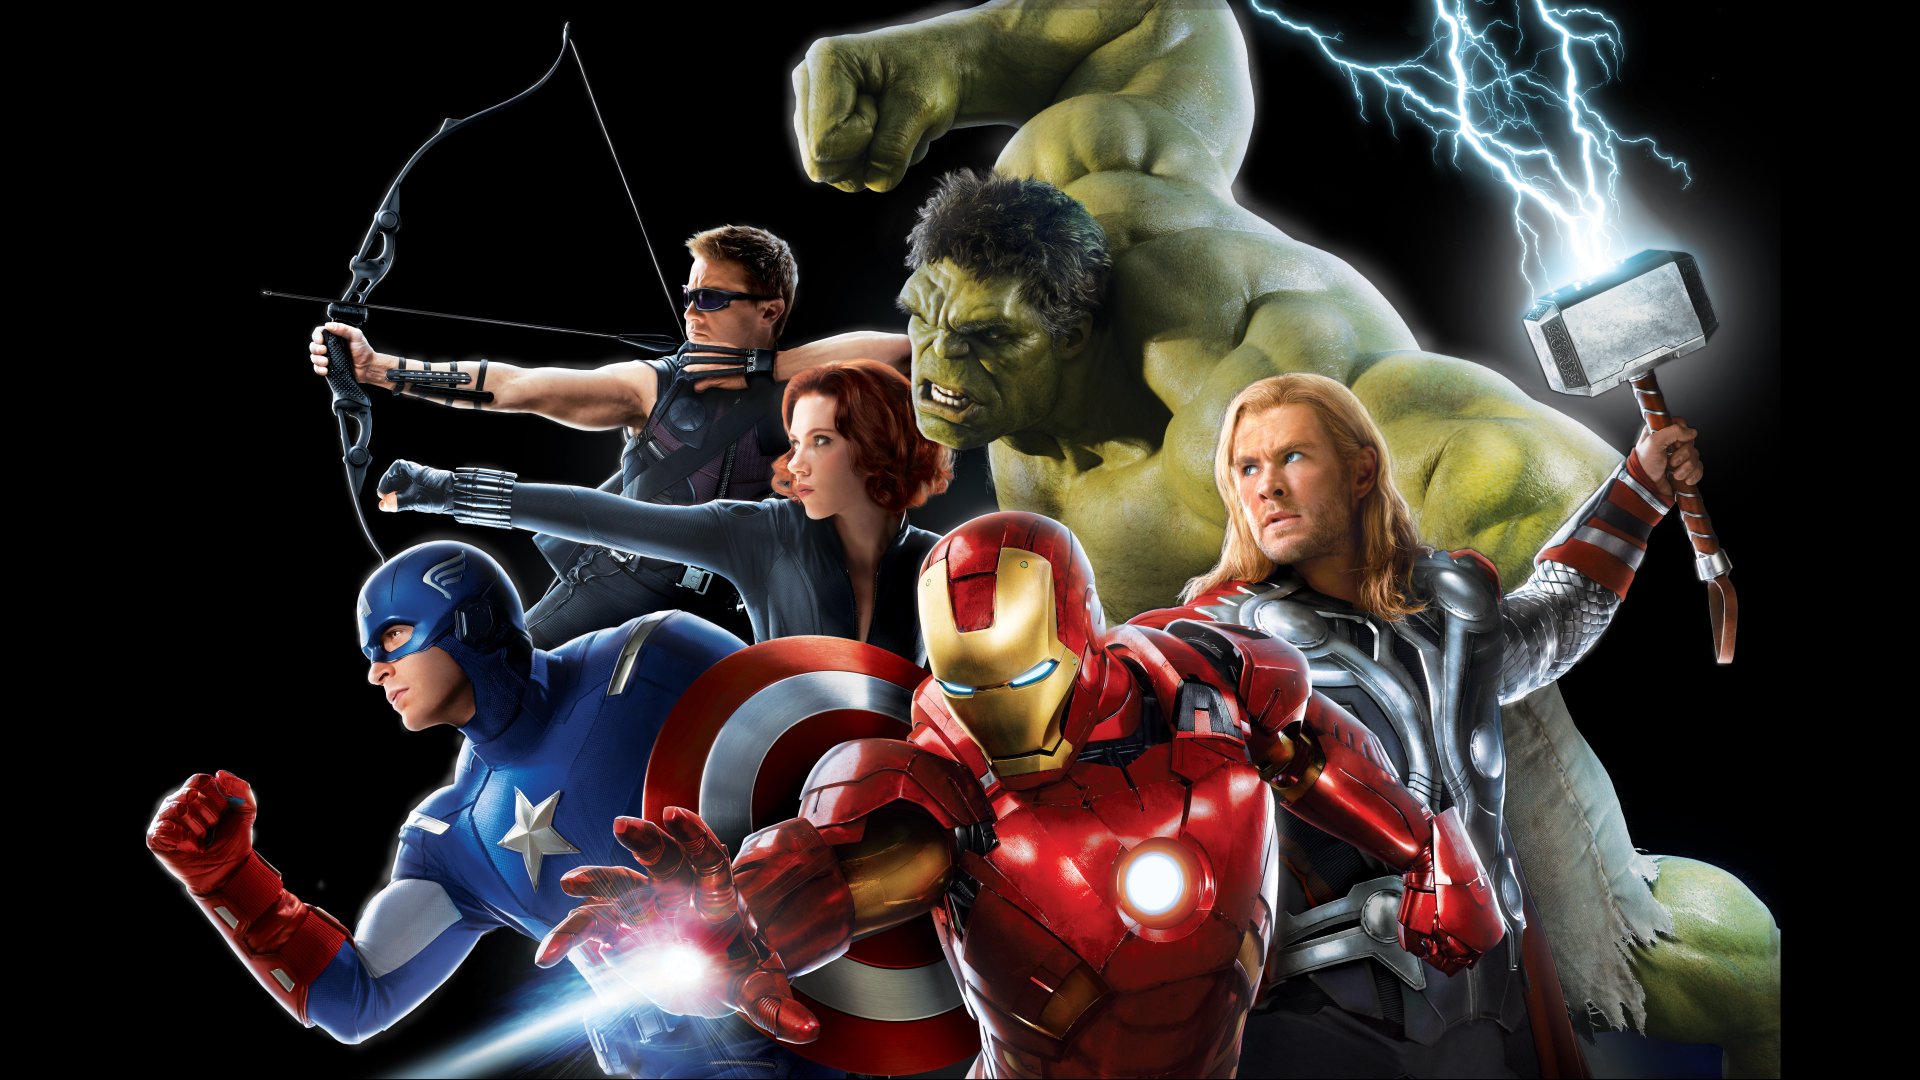 The Avengers download the last version for android